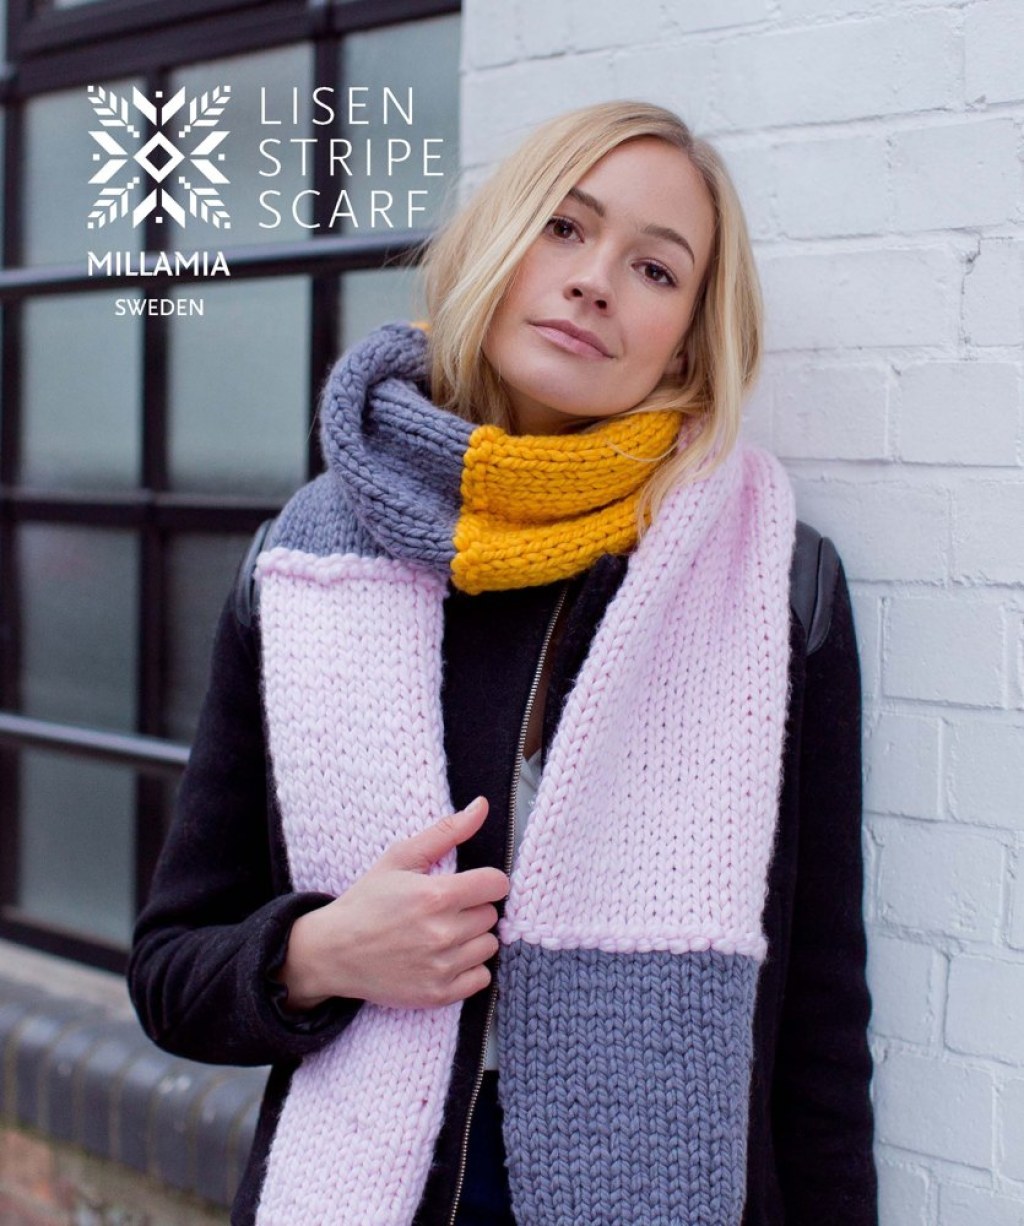 Picture of: Lisen Stripe Scarf – Knitting Pattern in MillaMia Naturally Soft